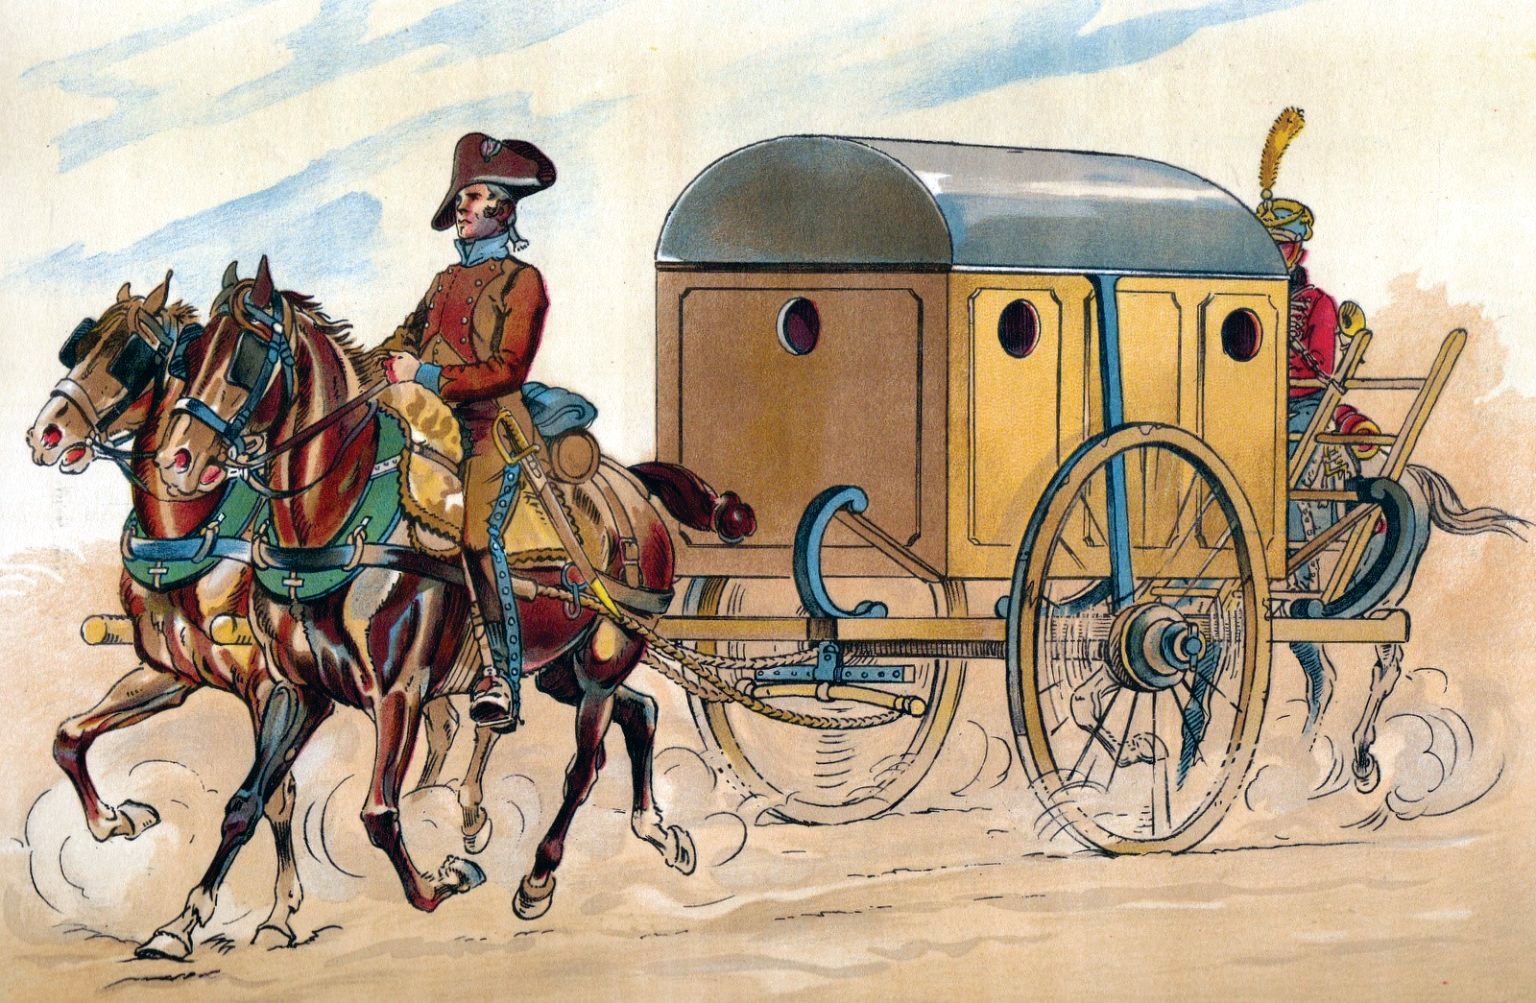 French surgeon Baron Dominique-Jean Larrey’s ambulance volante, or “flying ambulance,” was used to evacuate casualties from the battlefield during the Napoleonic wars.